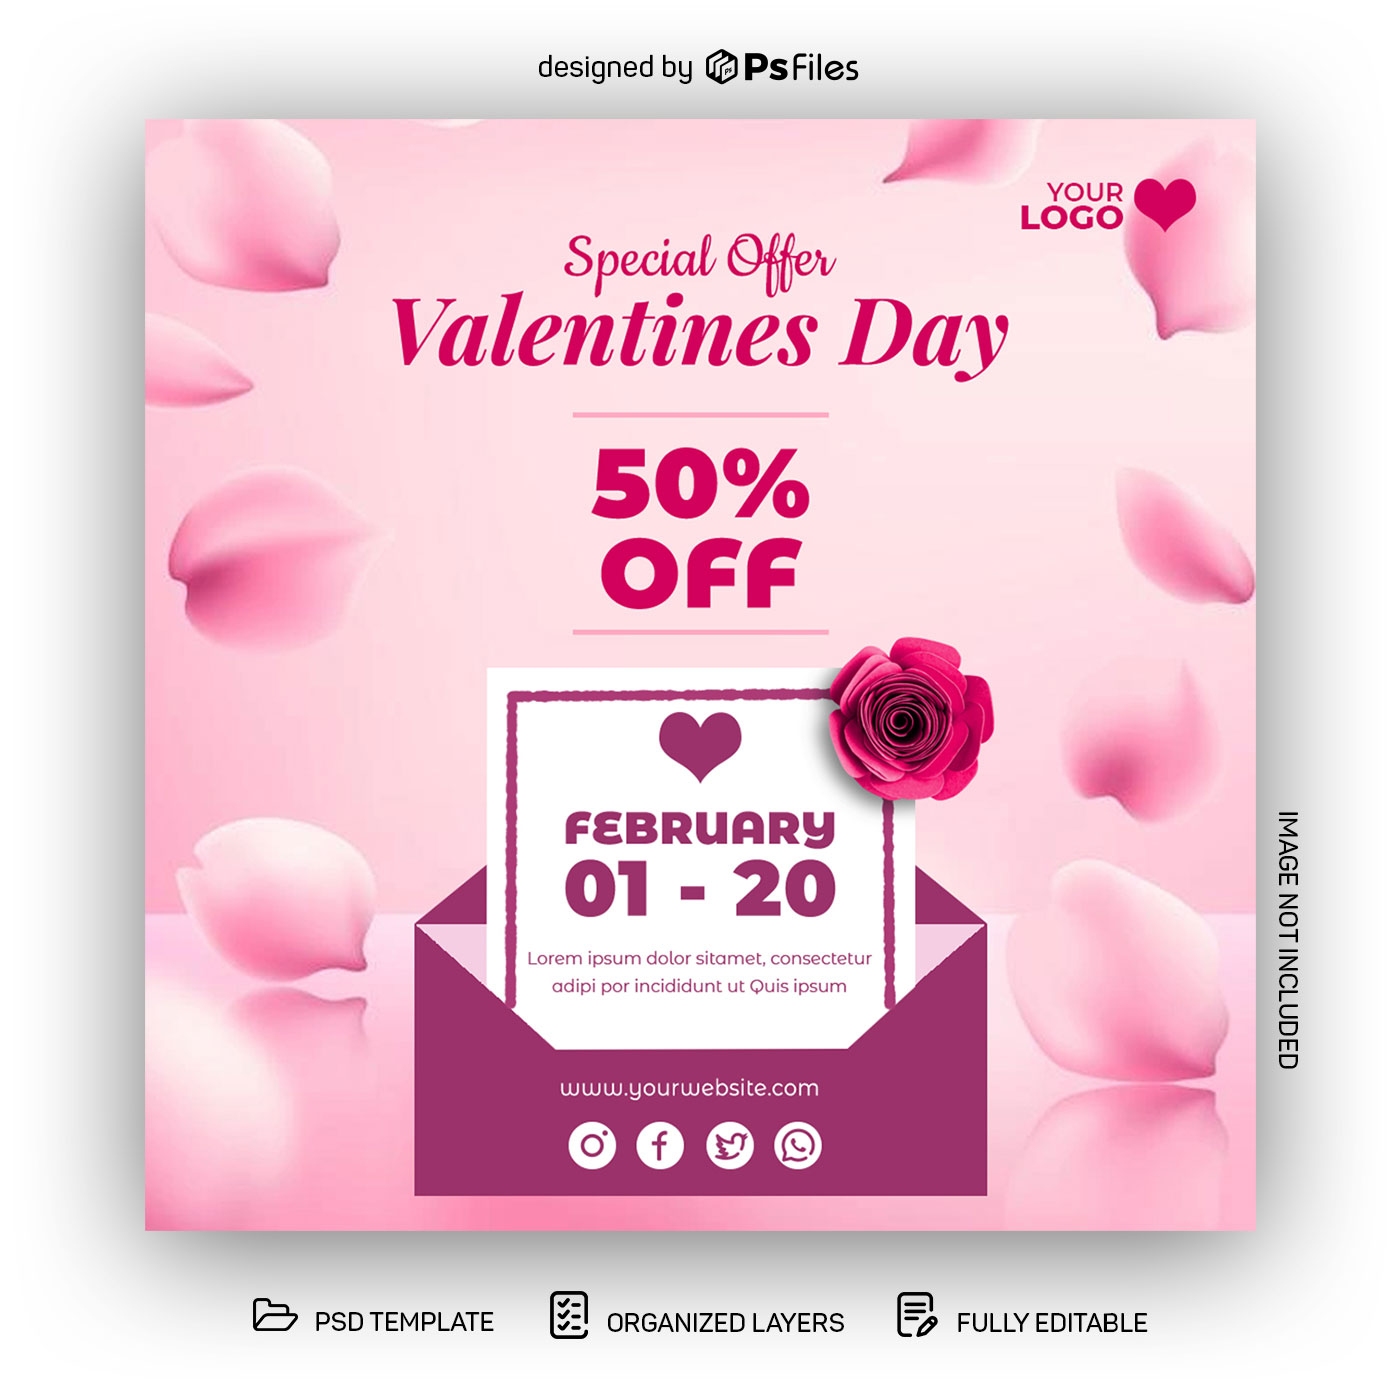 Valentines Day Special Offer Social Media Post PSD Template